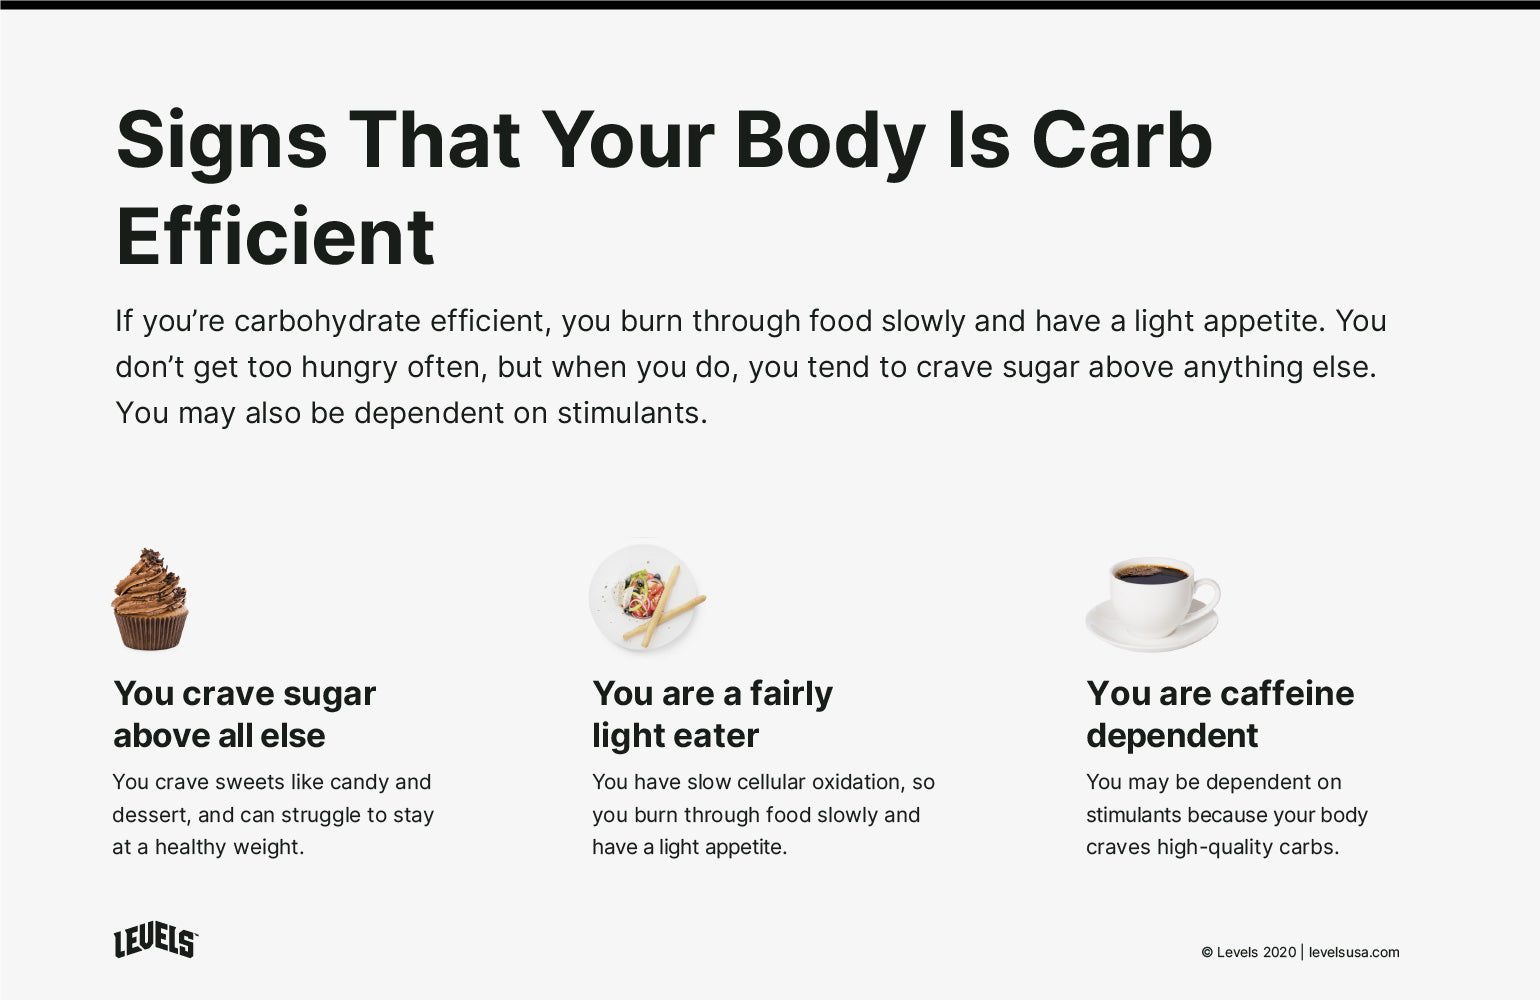 Signs You Have Carb Efficient Metabolism - Infographic